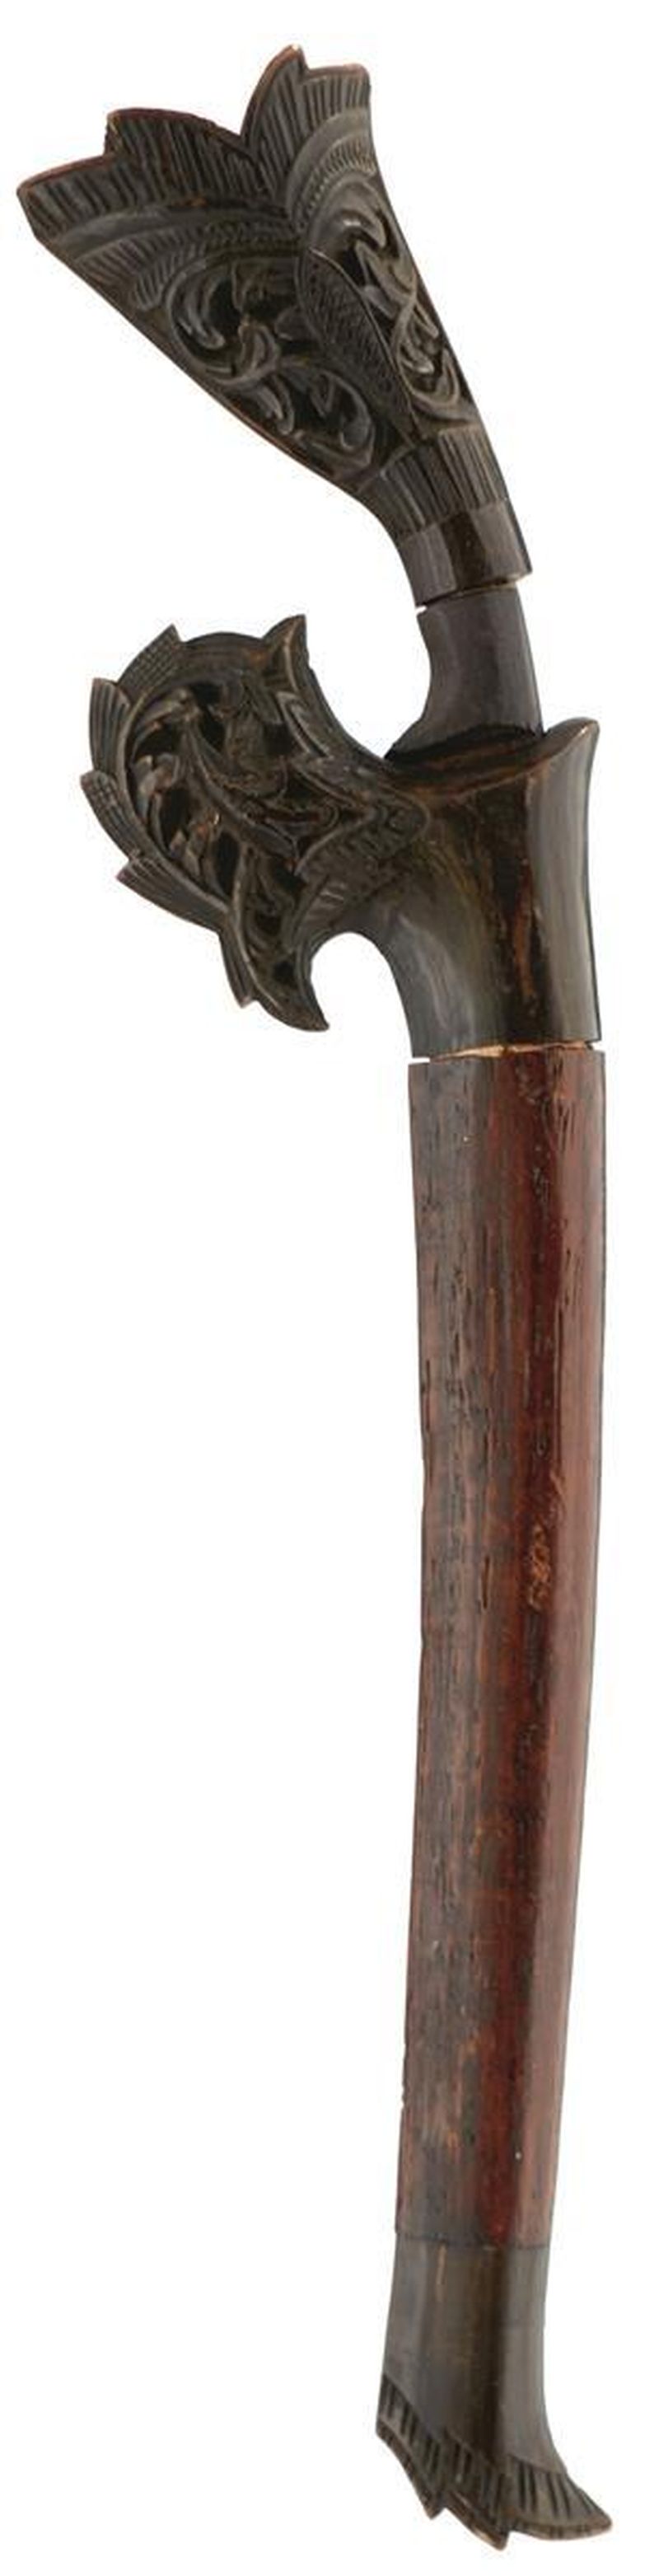 A RENCONG DAGGER, 14.25cm curved blade, characteristic carved wooden hilt, contained in its carved